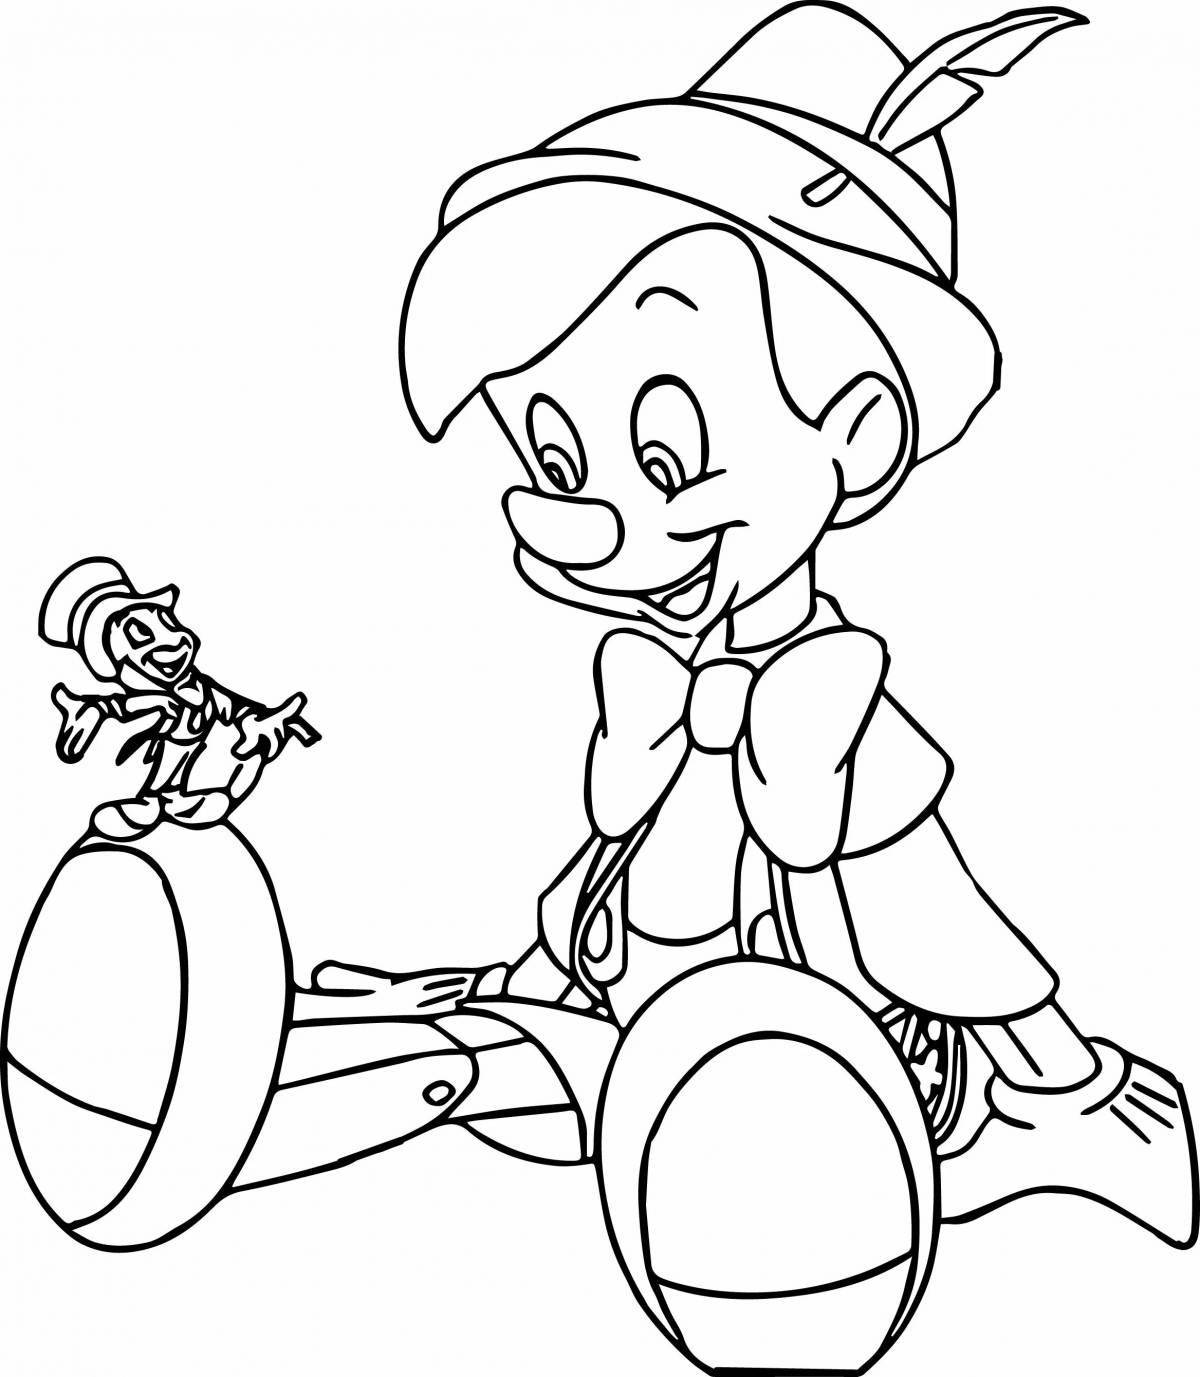 Pinocchio bright coloring for kids